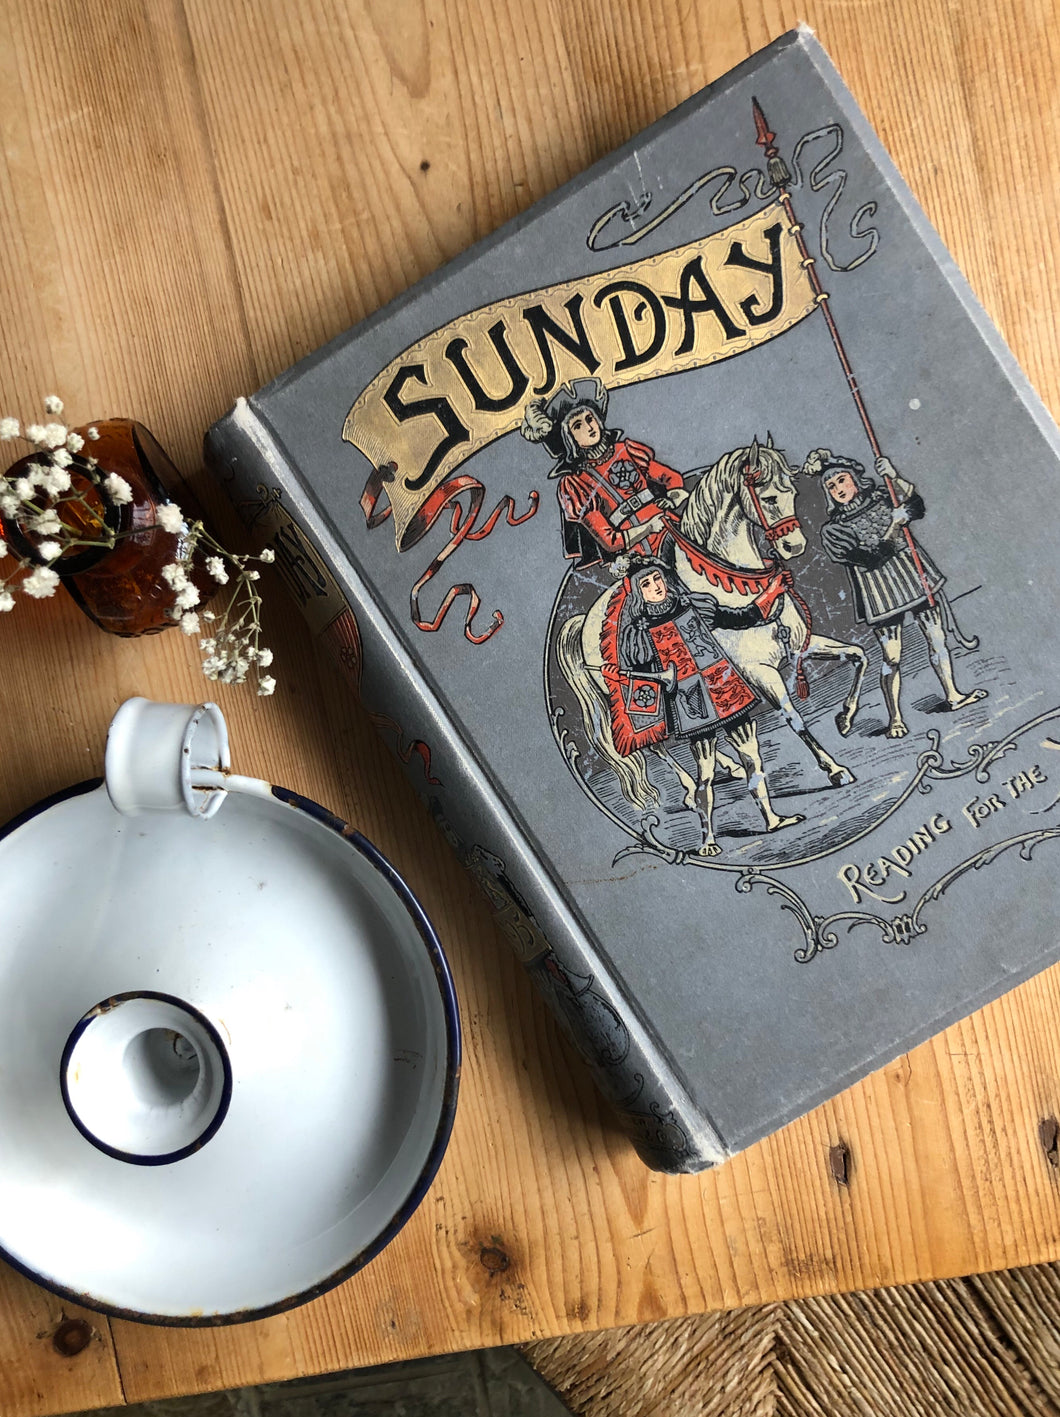 1894 'Sunday Reading for the young' Antique book